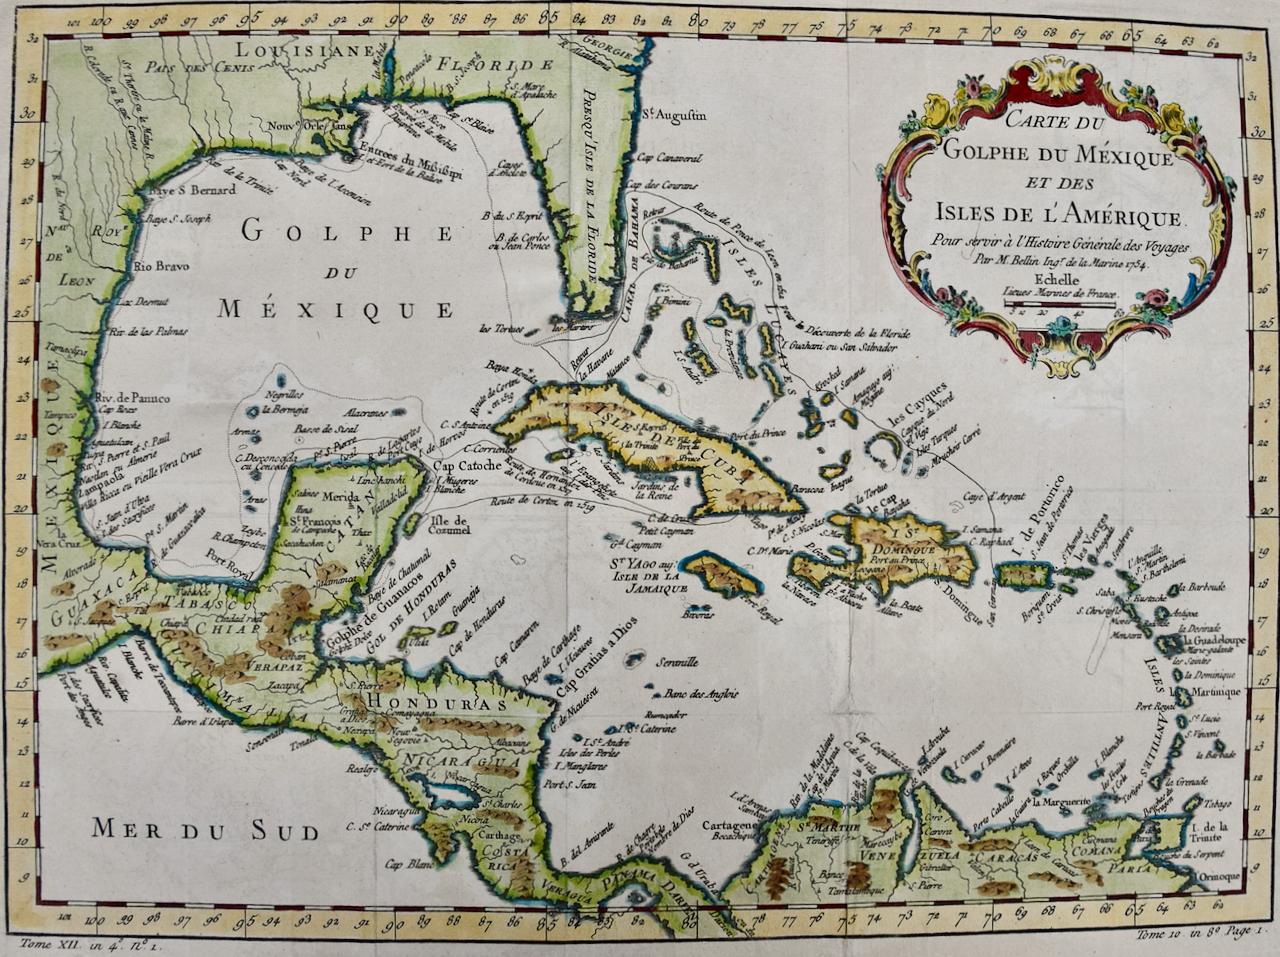 Gulf of Mexico, Florida, C. America, Cuba: 18th C. Hand-colored Map by Bellin - Print by Jacques-Nicolas Bellin